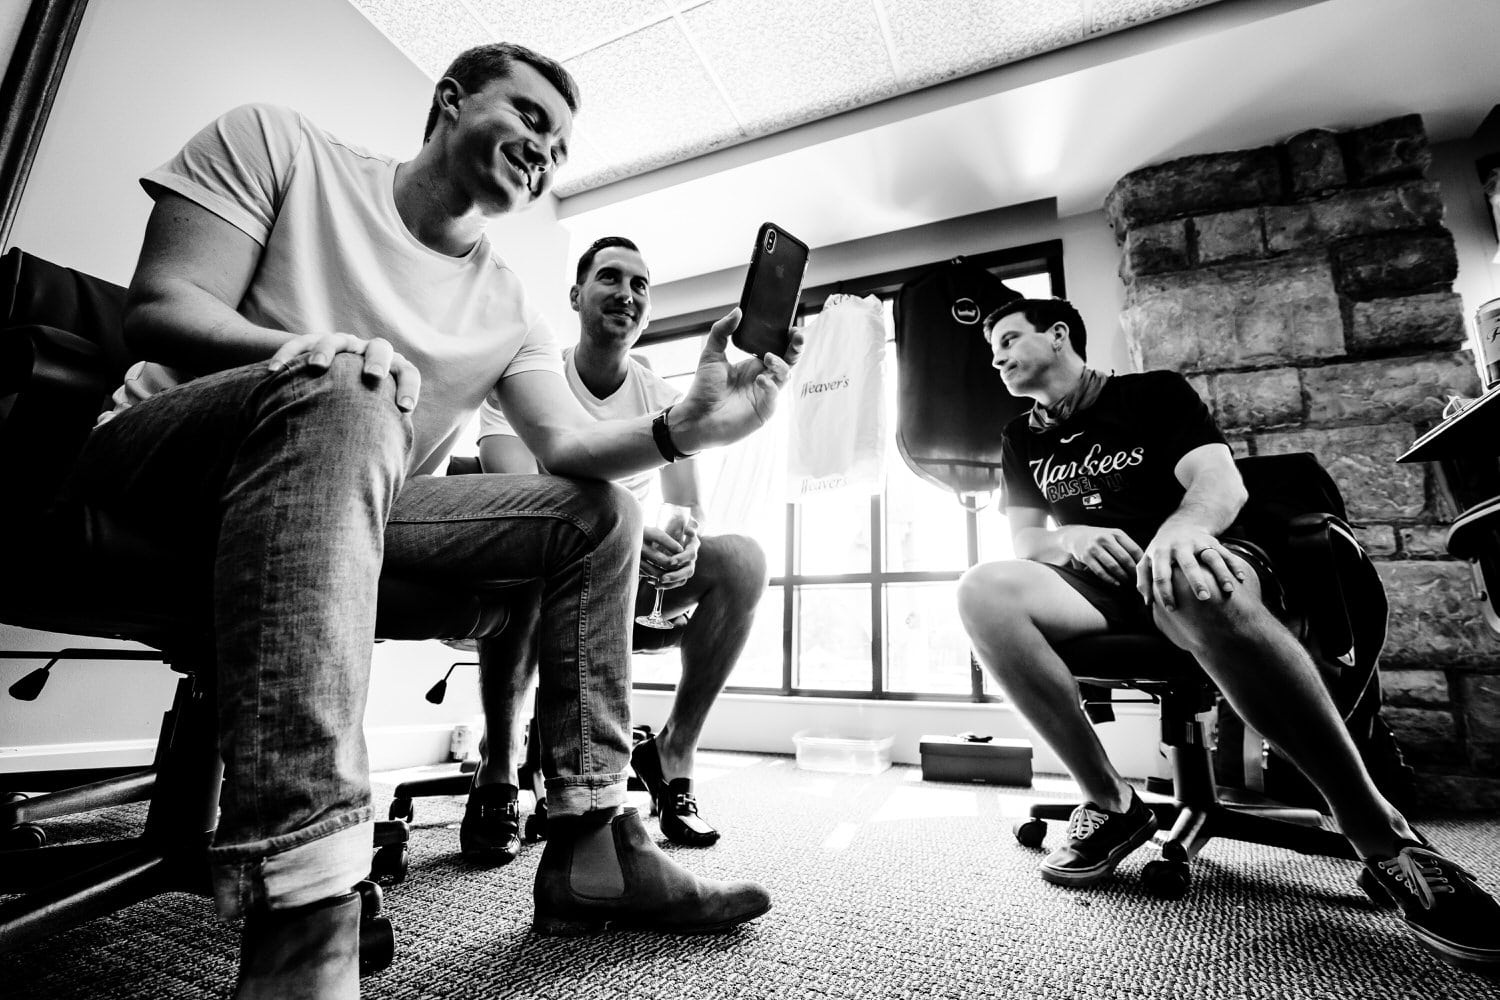 A candid black and white picture of a group of groomsmen laughing at something on a cell phone. 